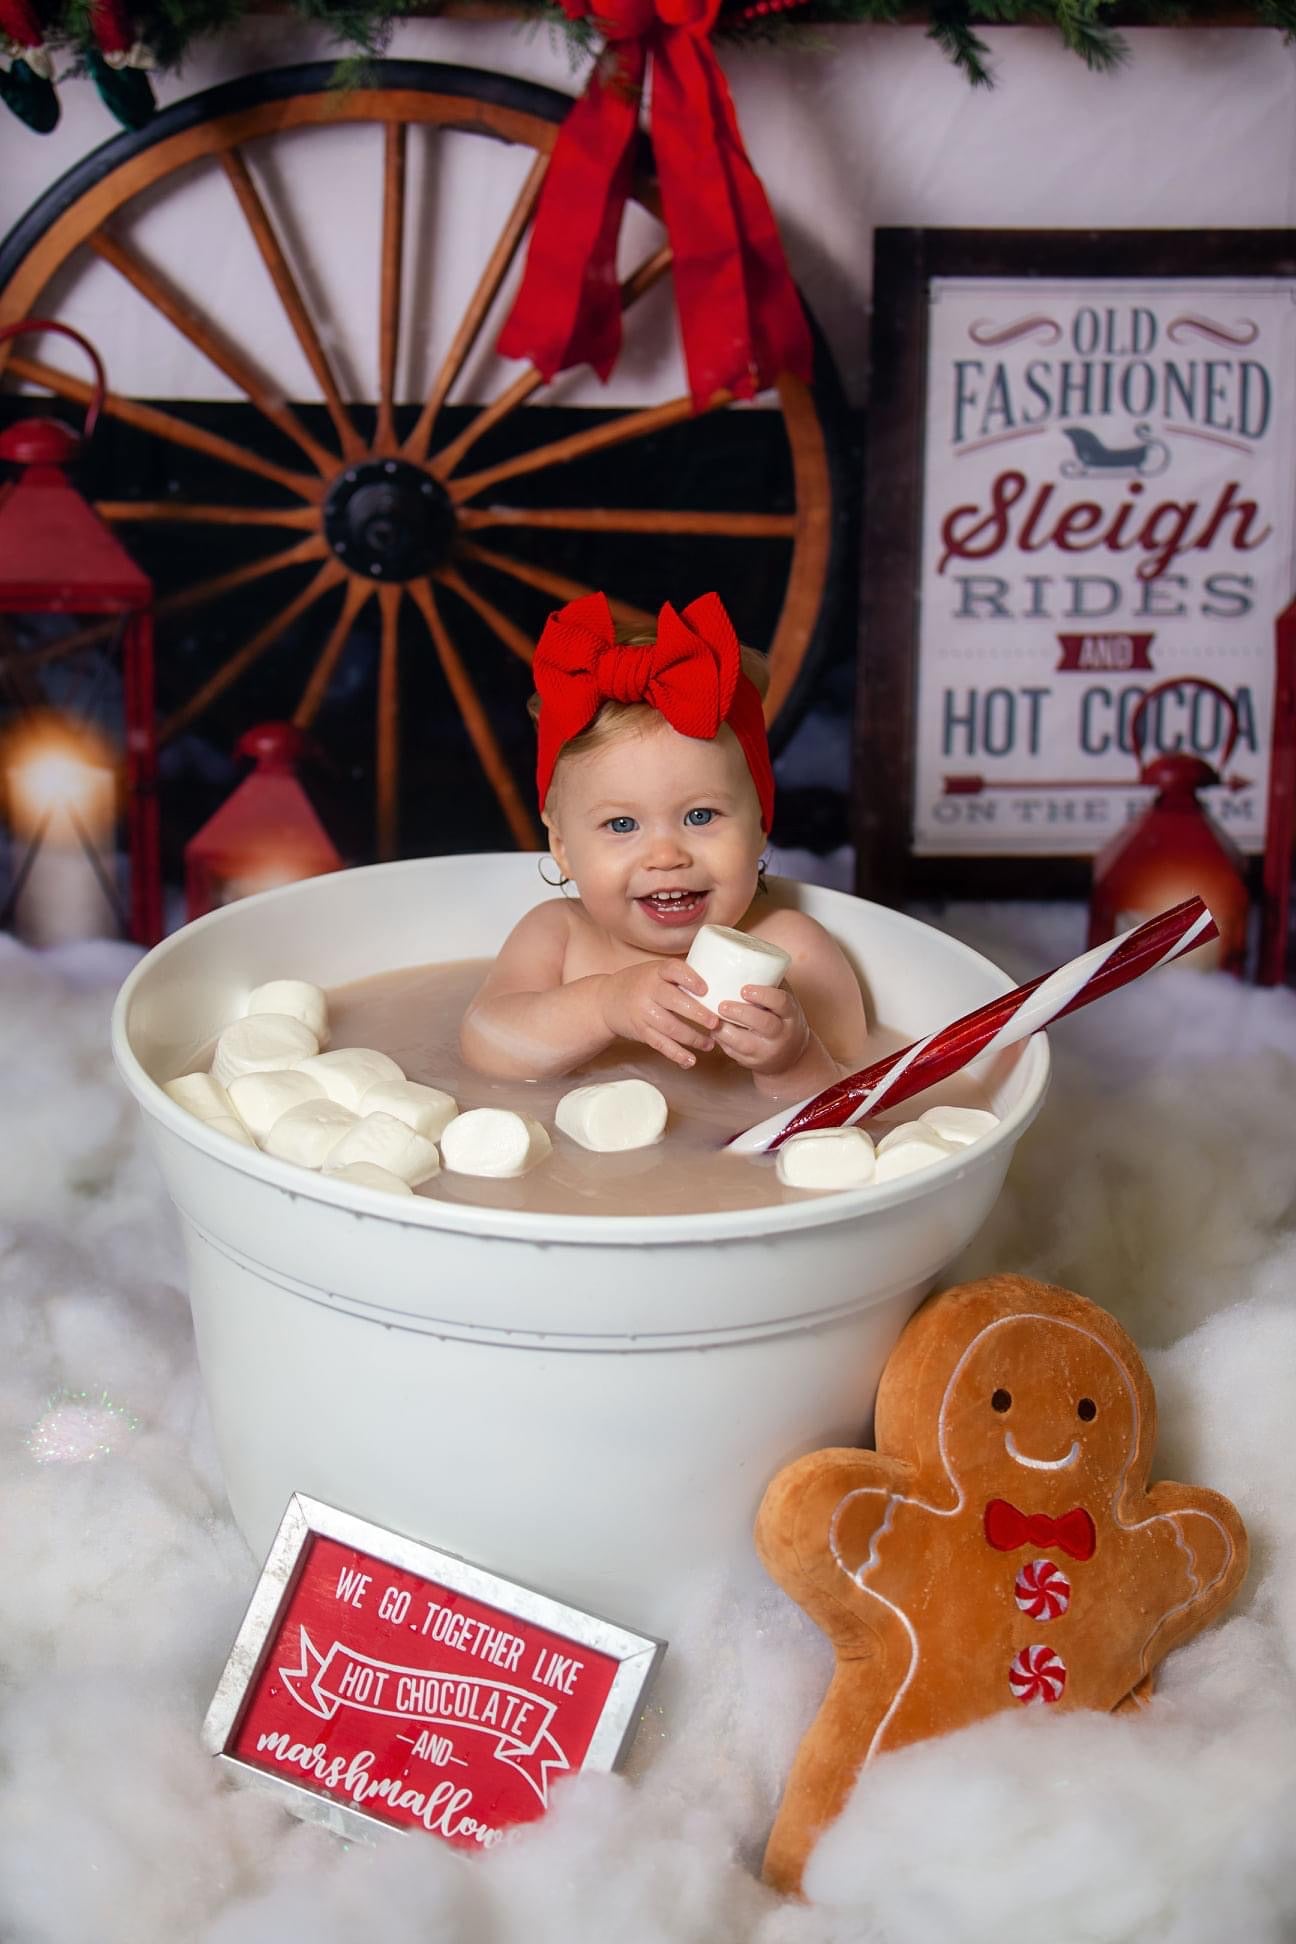 Hot Cocoa Stand with Lights – Baby Dream Backdrops